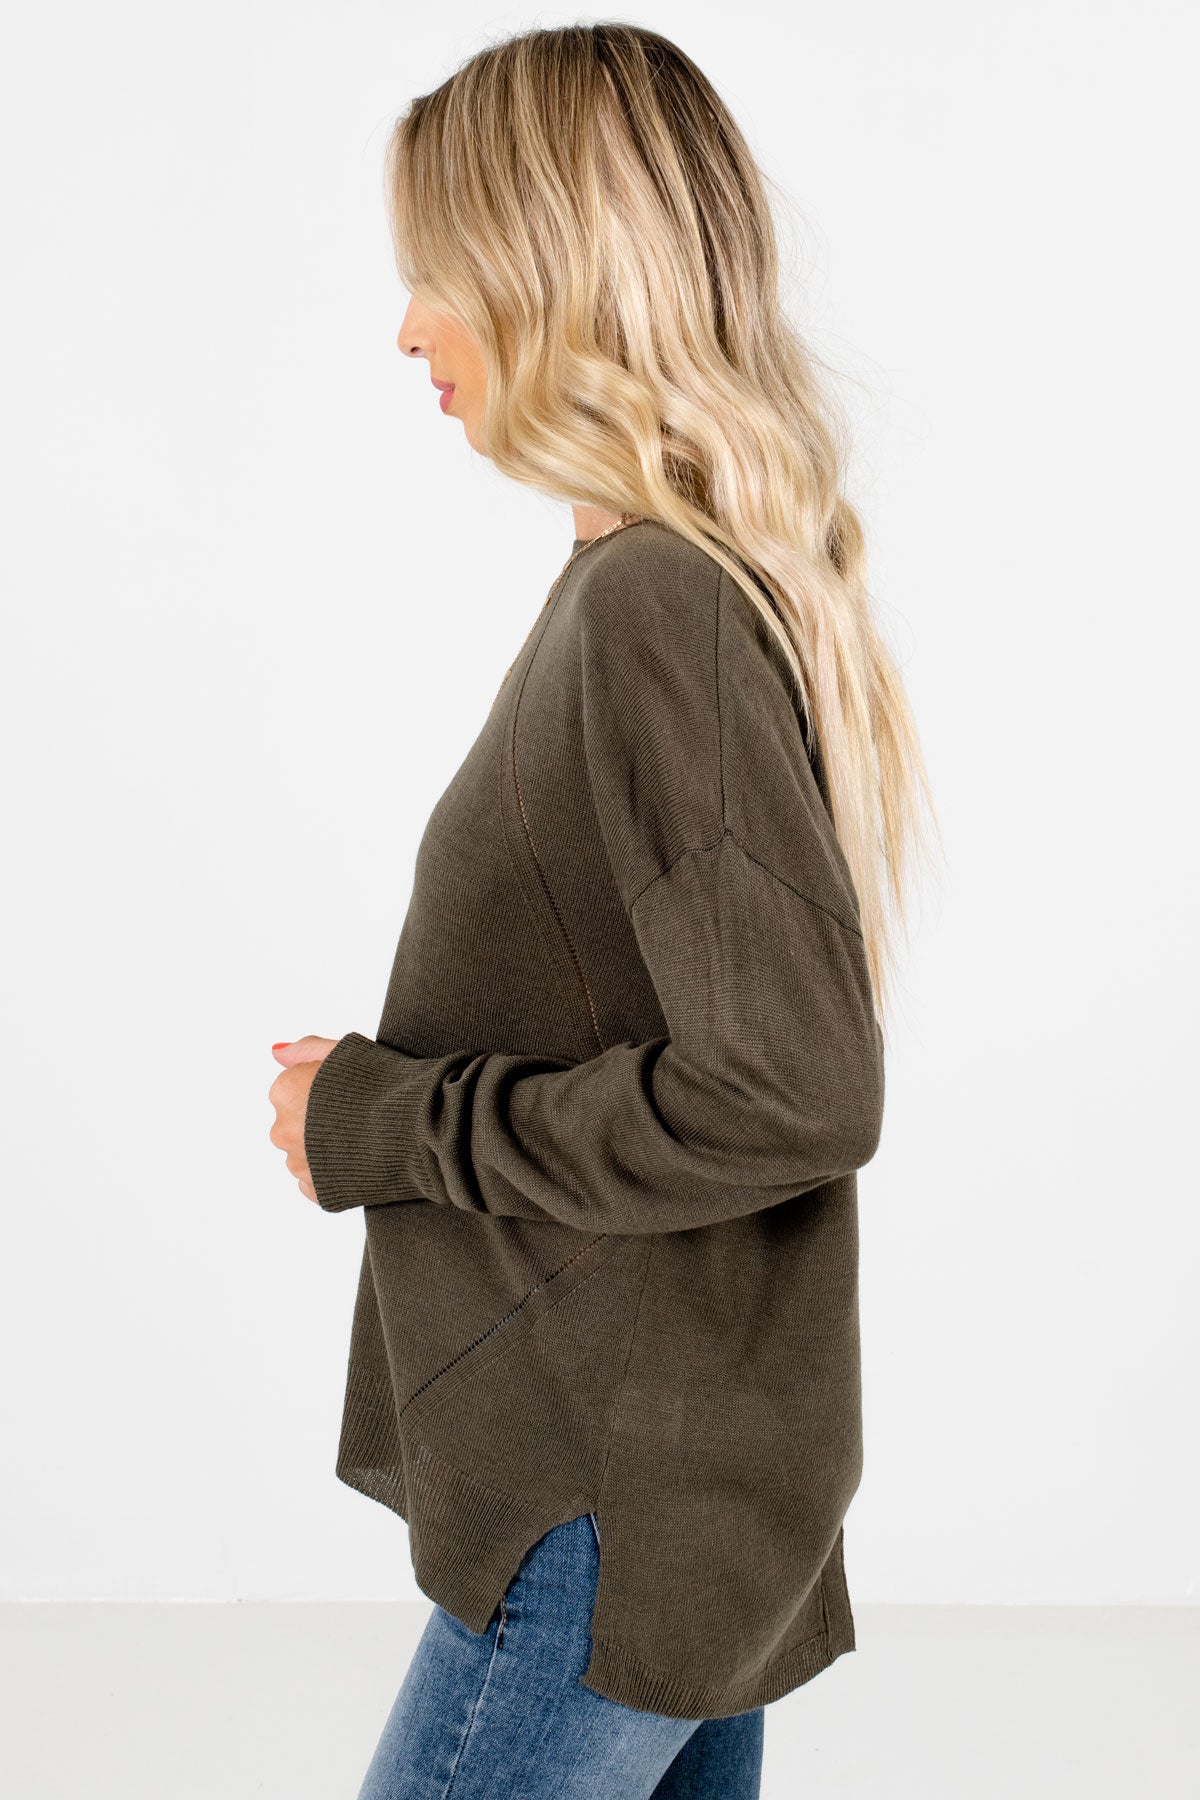 Olive Green Lightweight Knit Material Boutique Sweaters for Women